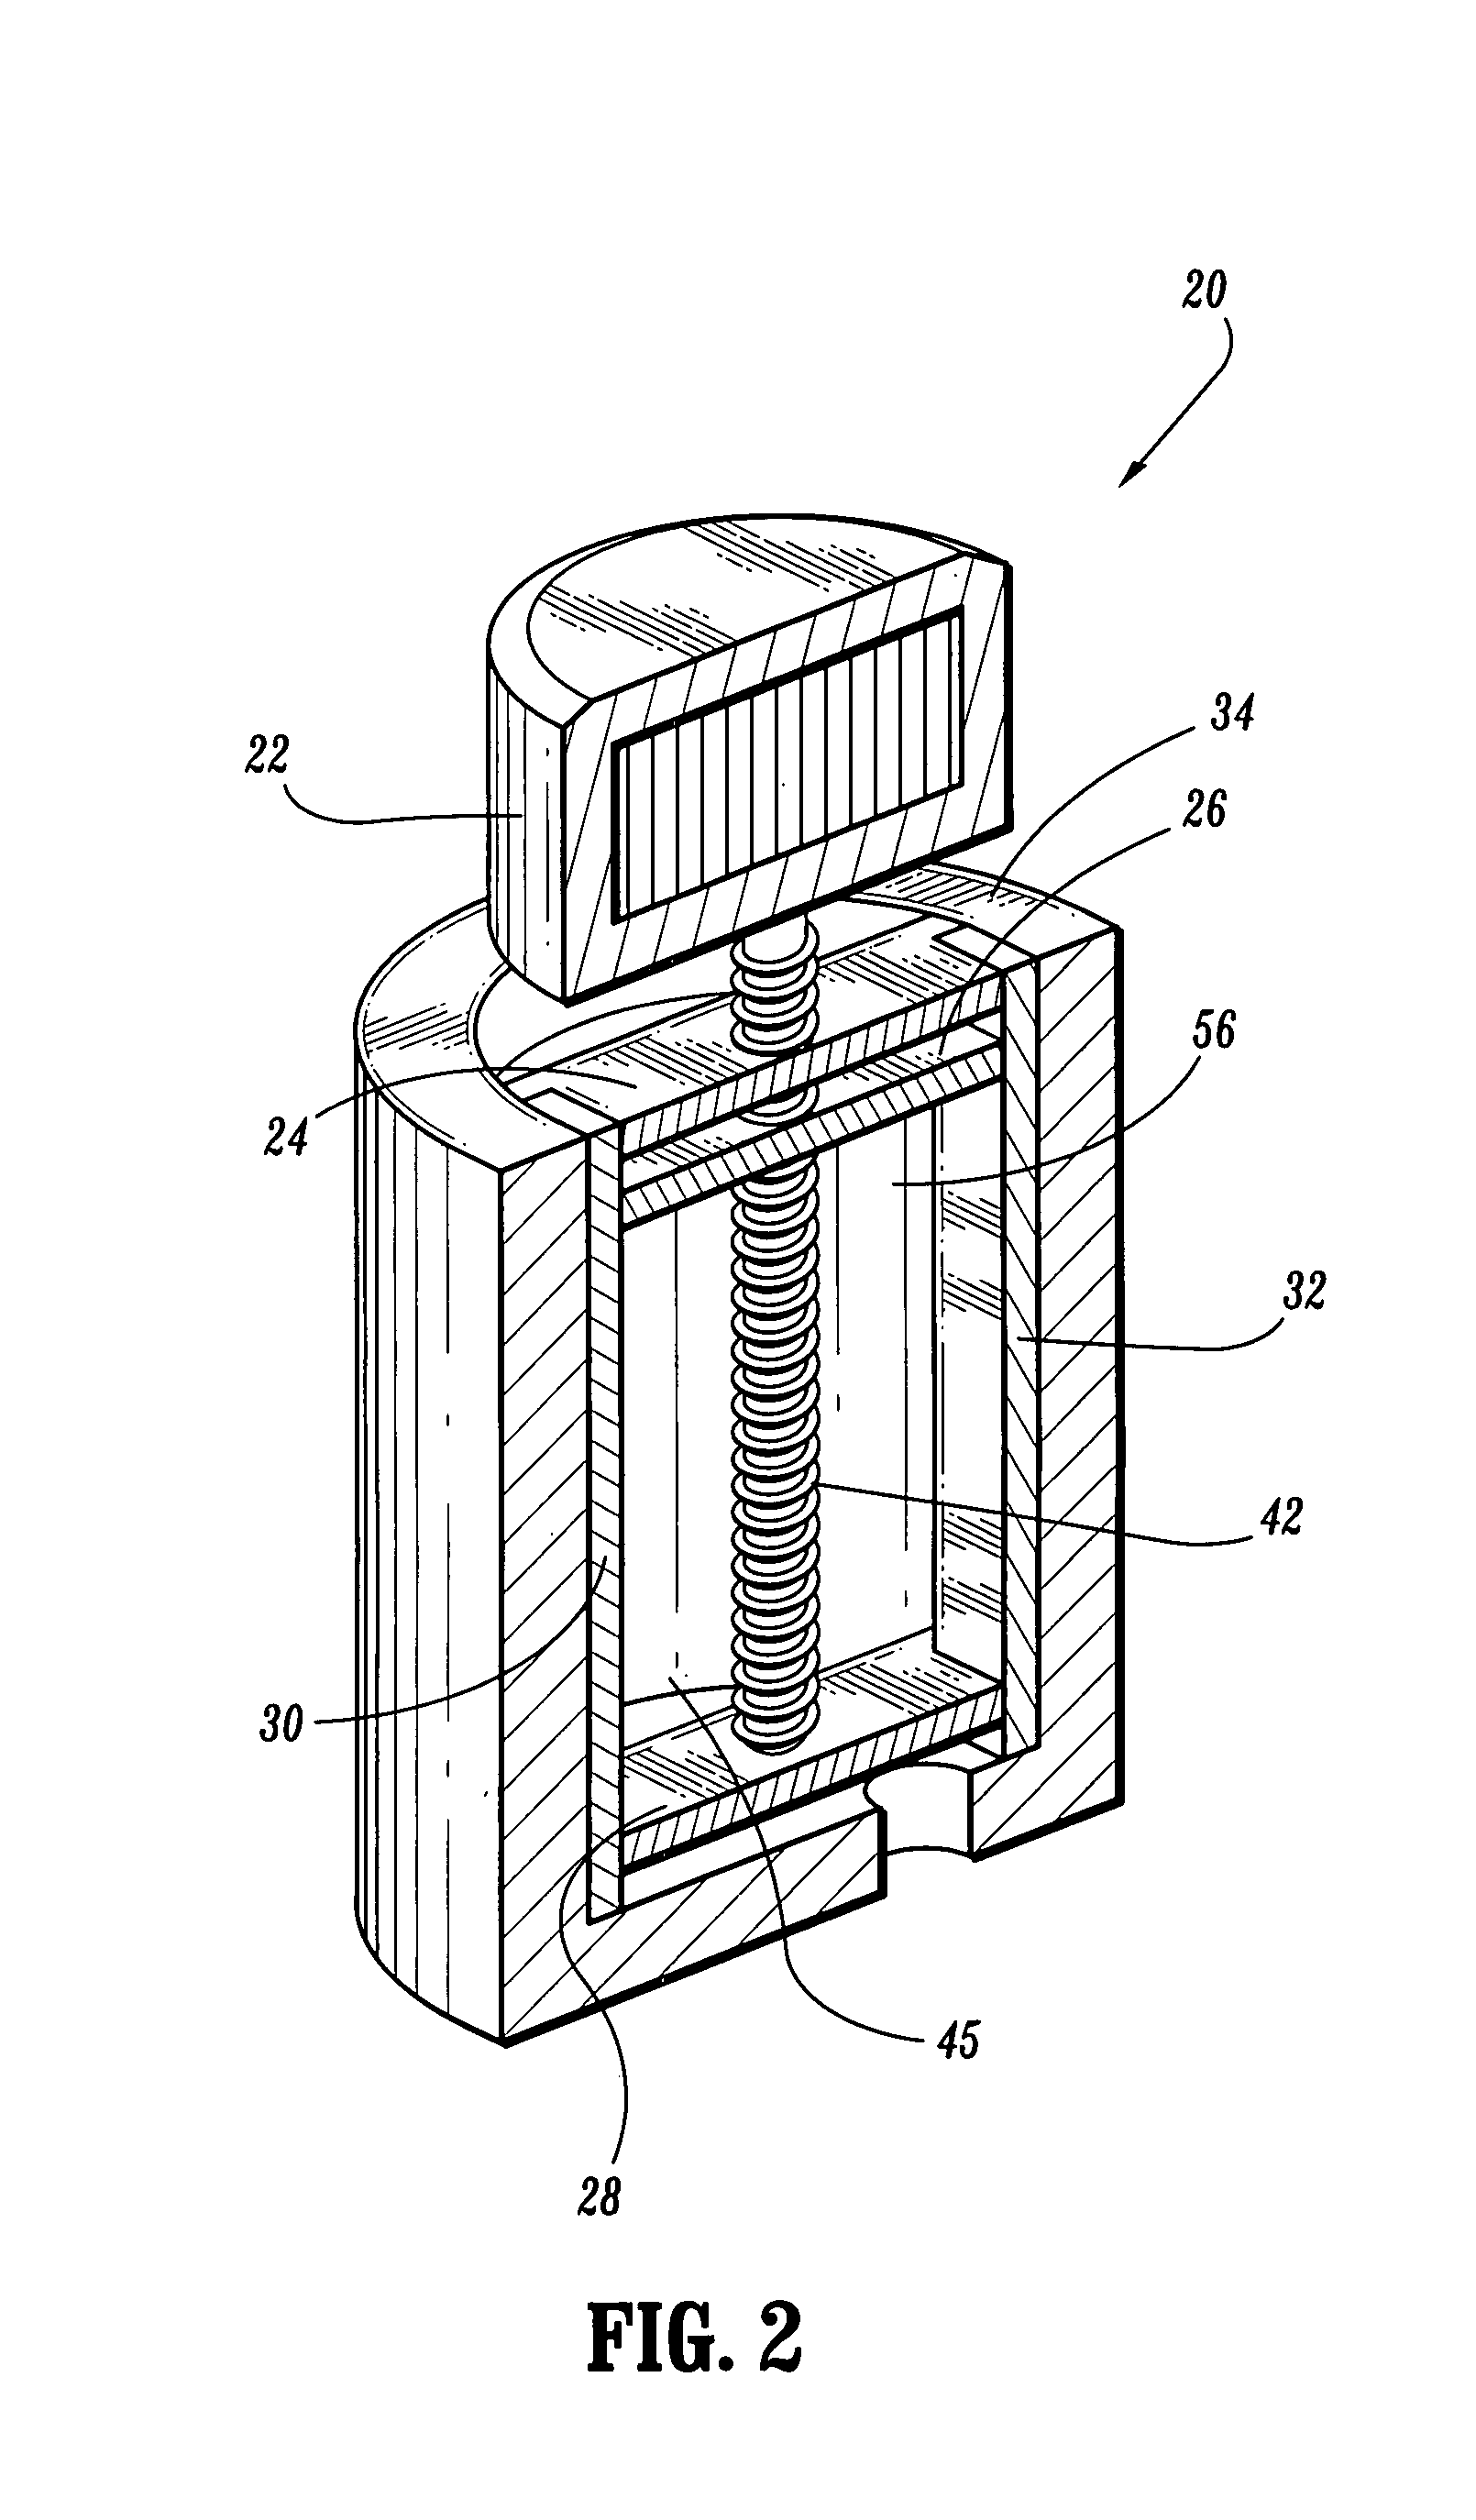 Apparatus for making ice cream having an improved dispenser